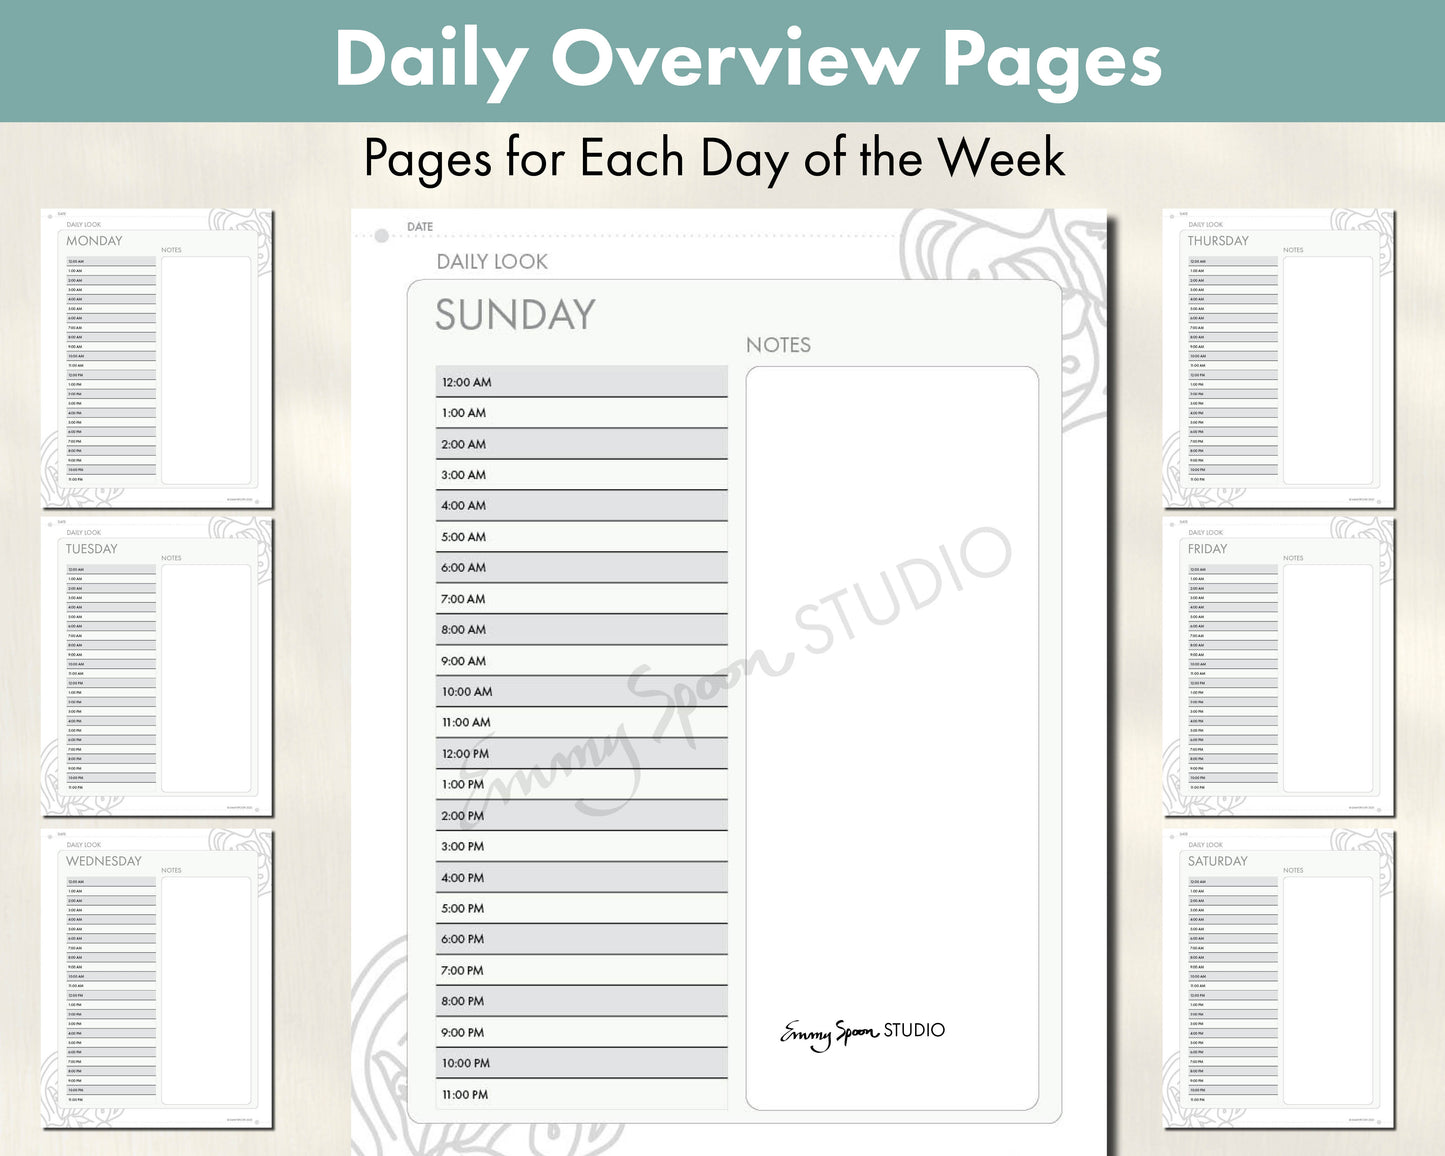 Daily Overview Pages - Pages for Each Day of the week - Sunday, Monday, Tuesday, Wednesday, Thursday, Friday, Saturday, by Emmy Spoon Studio